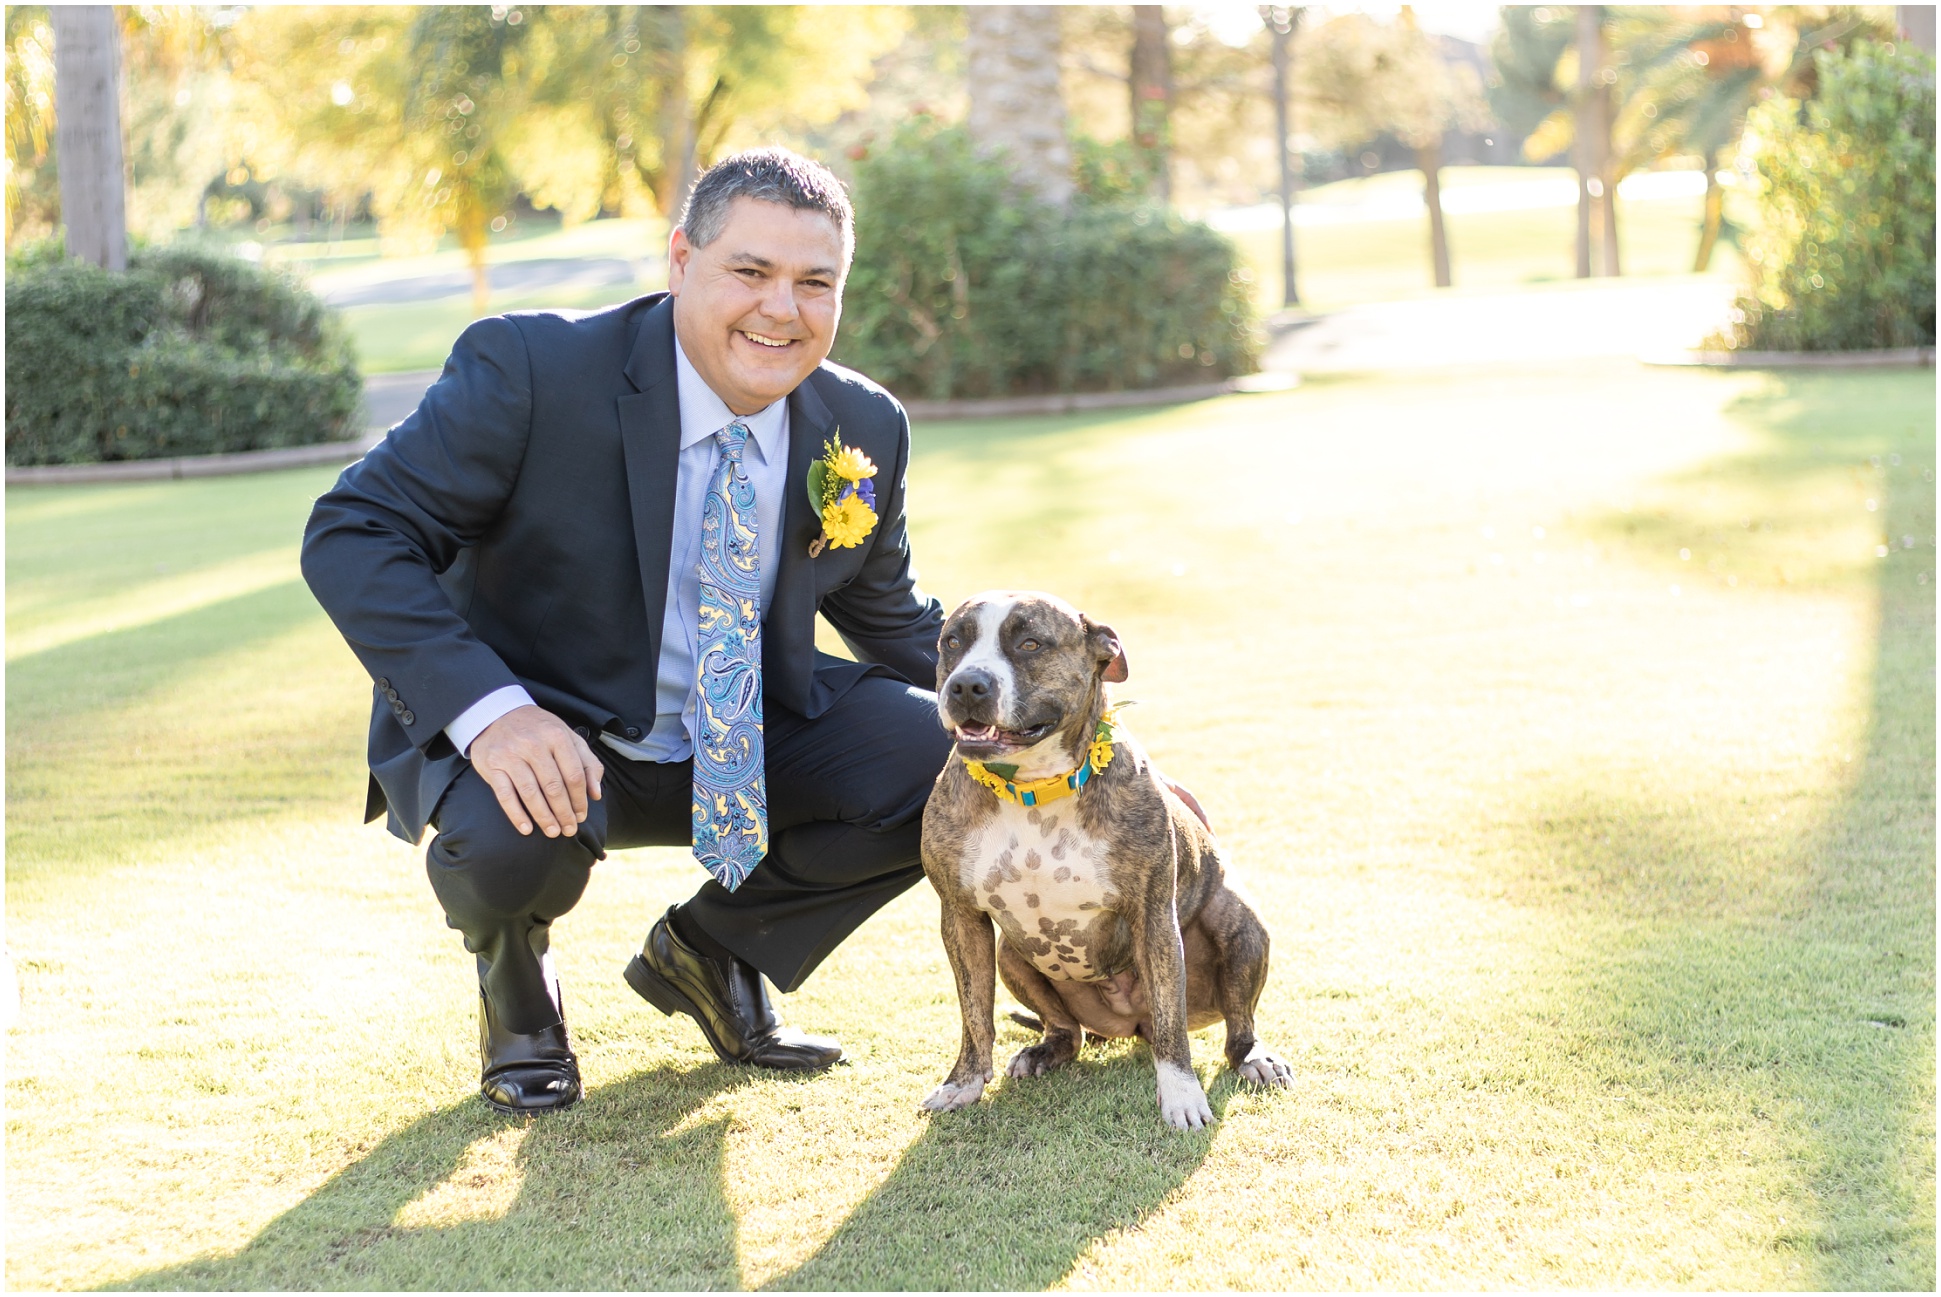 The Groom and his Pitbull dog